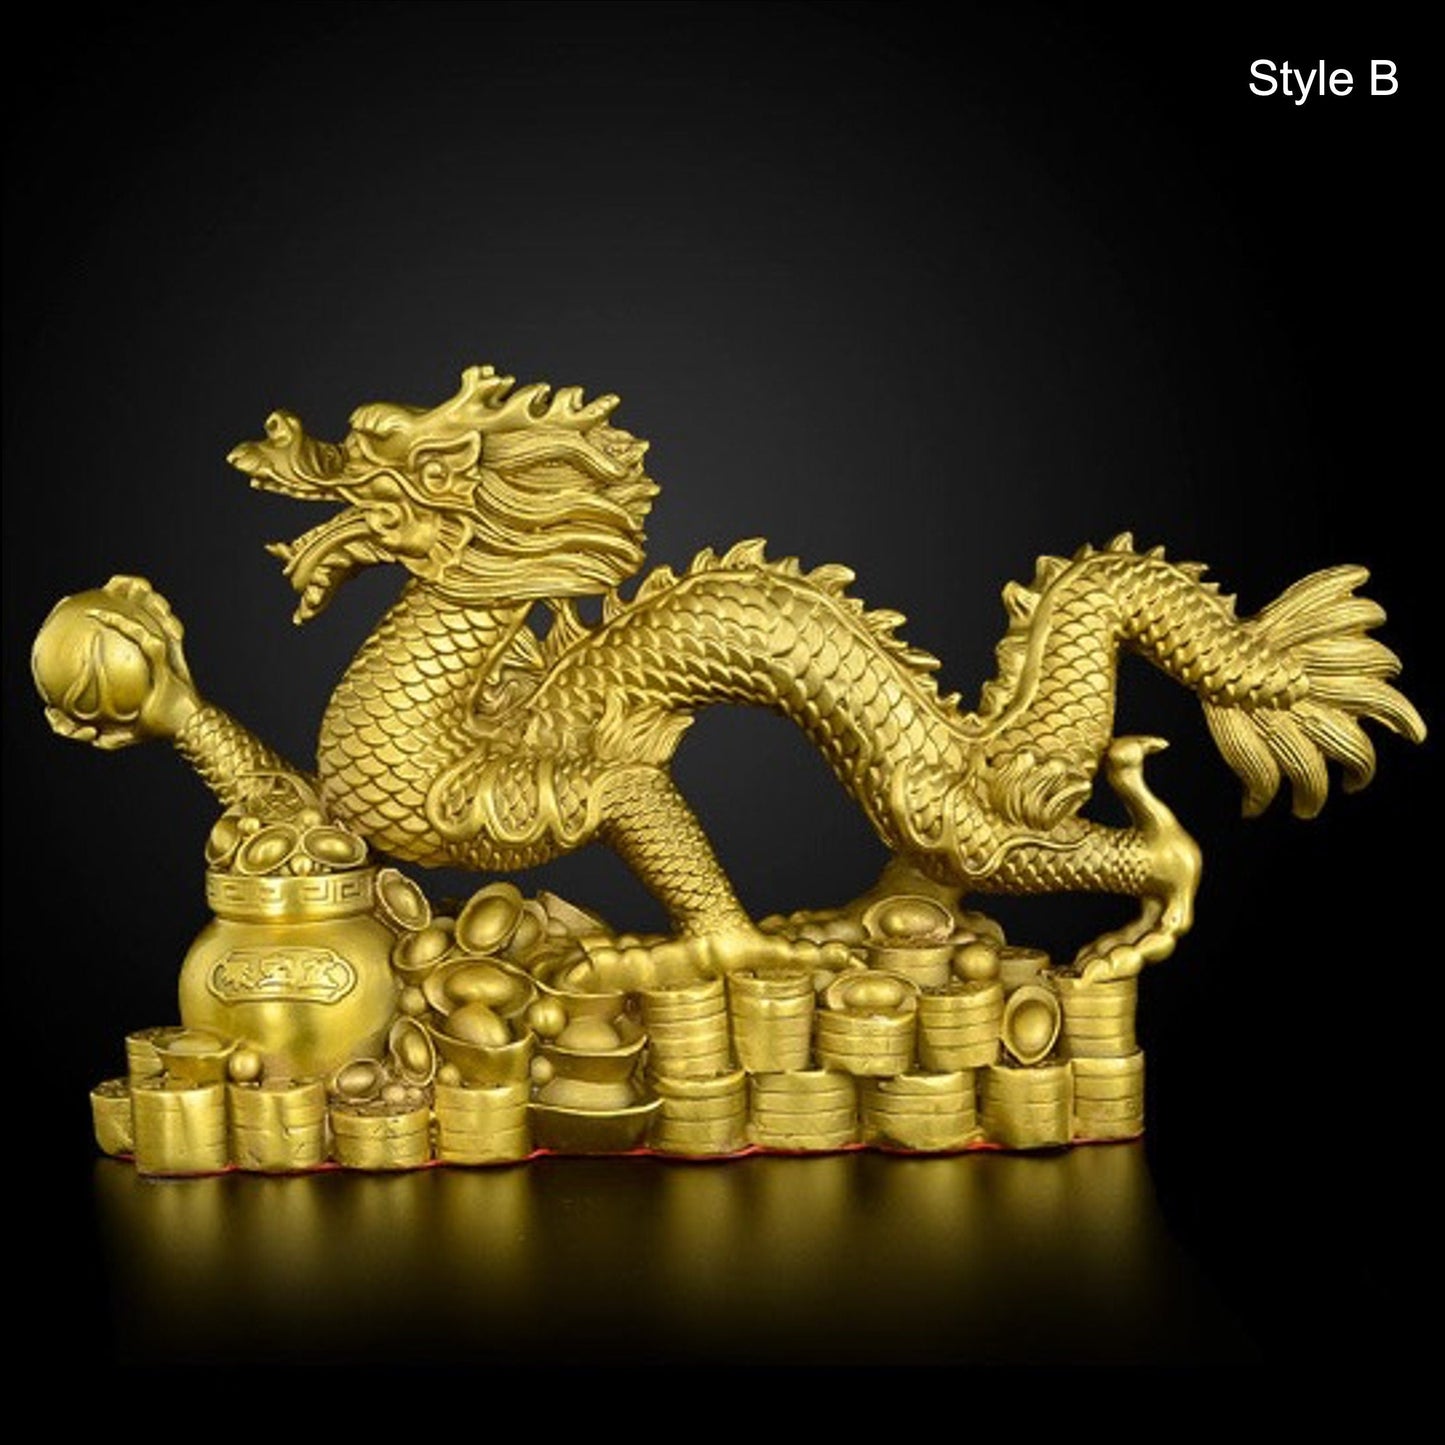 Brass Dragon Phoenix Sculpture & Statue | Fengshui | Good Fortune and Prosperity | Home Decor and Business Display